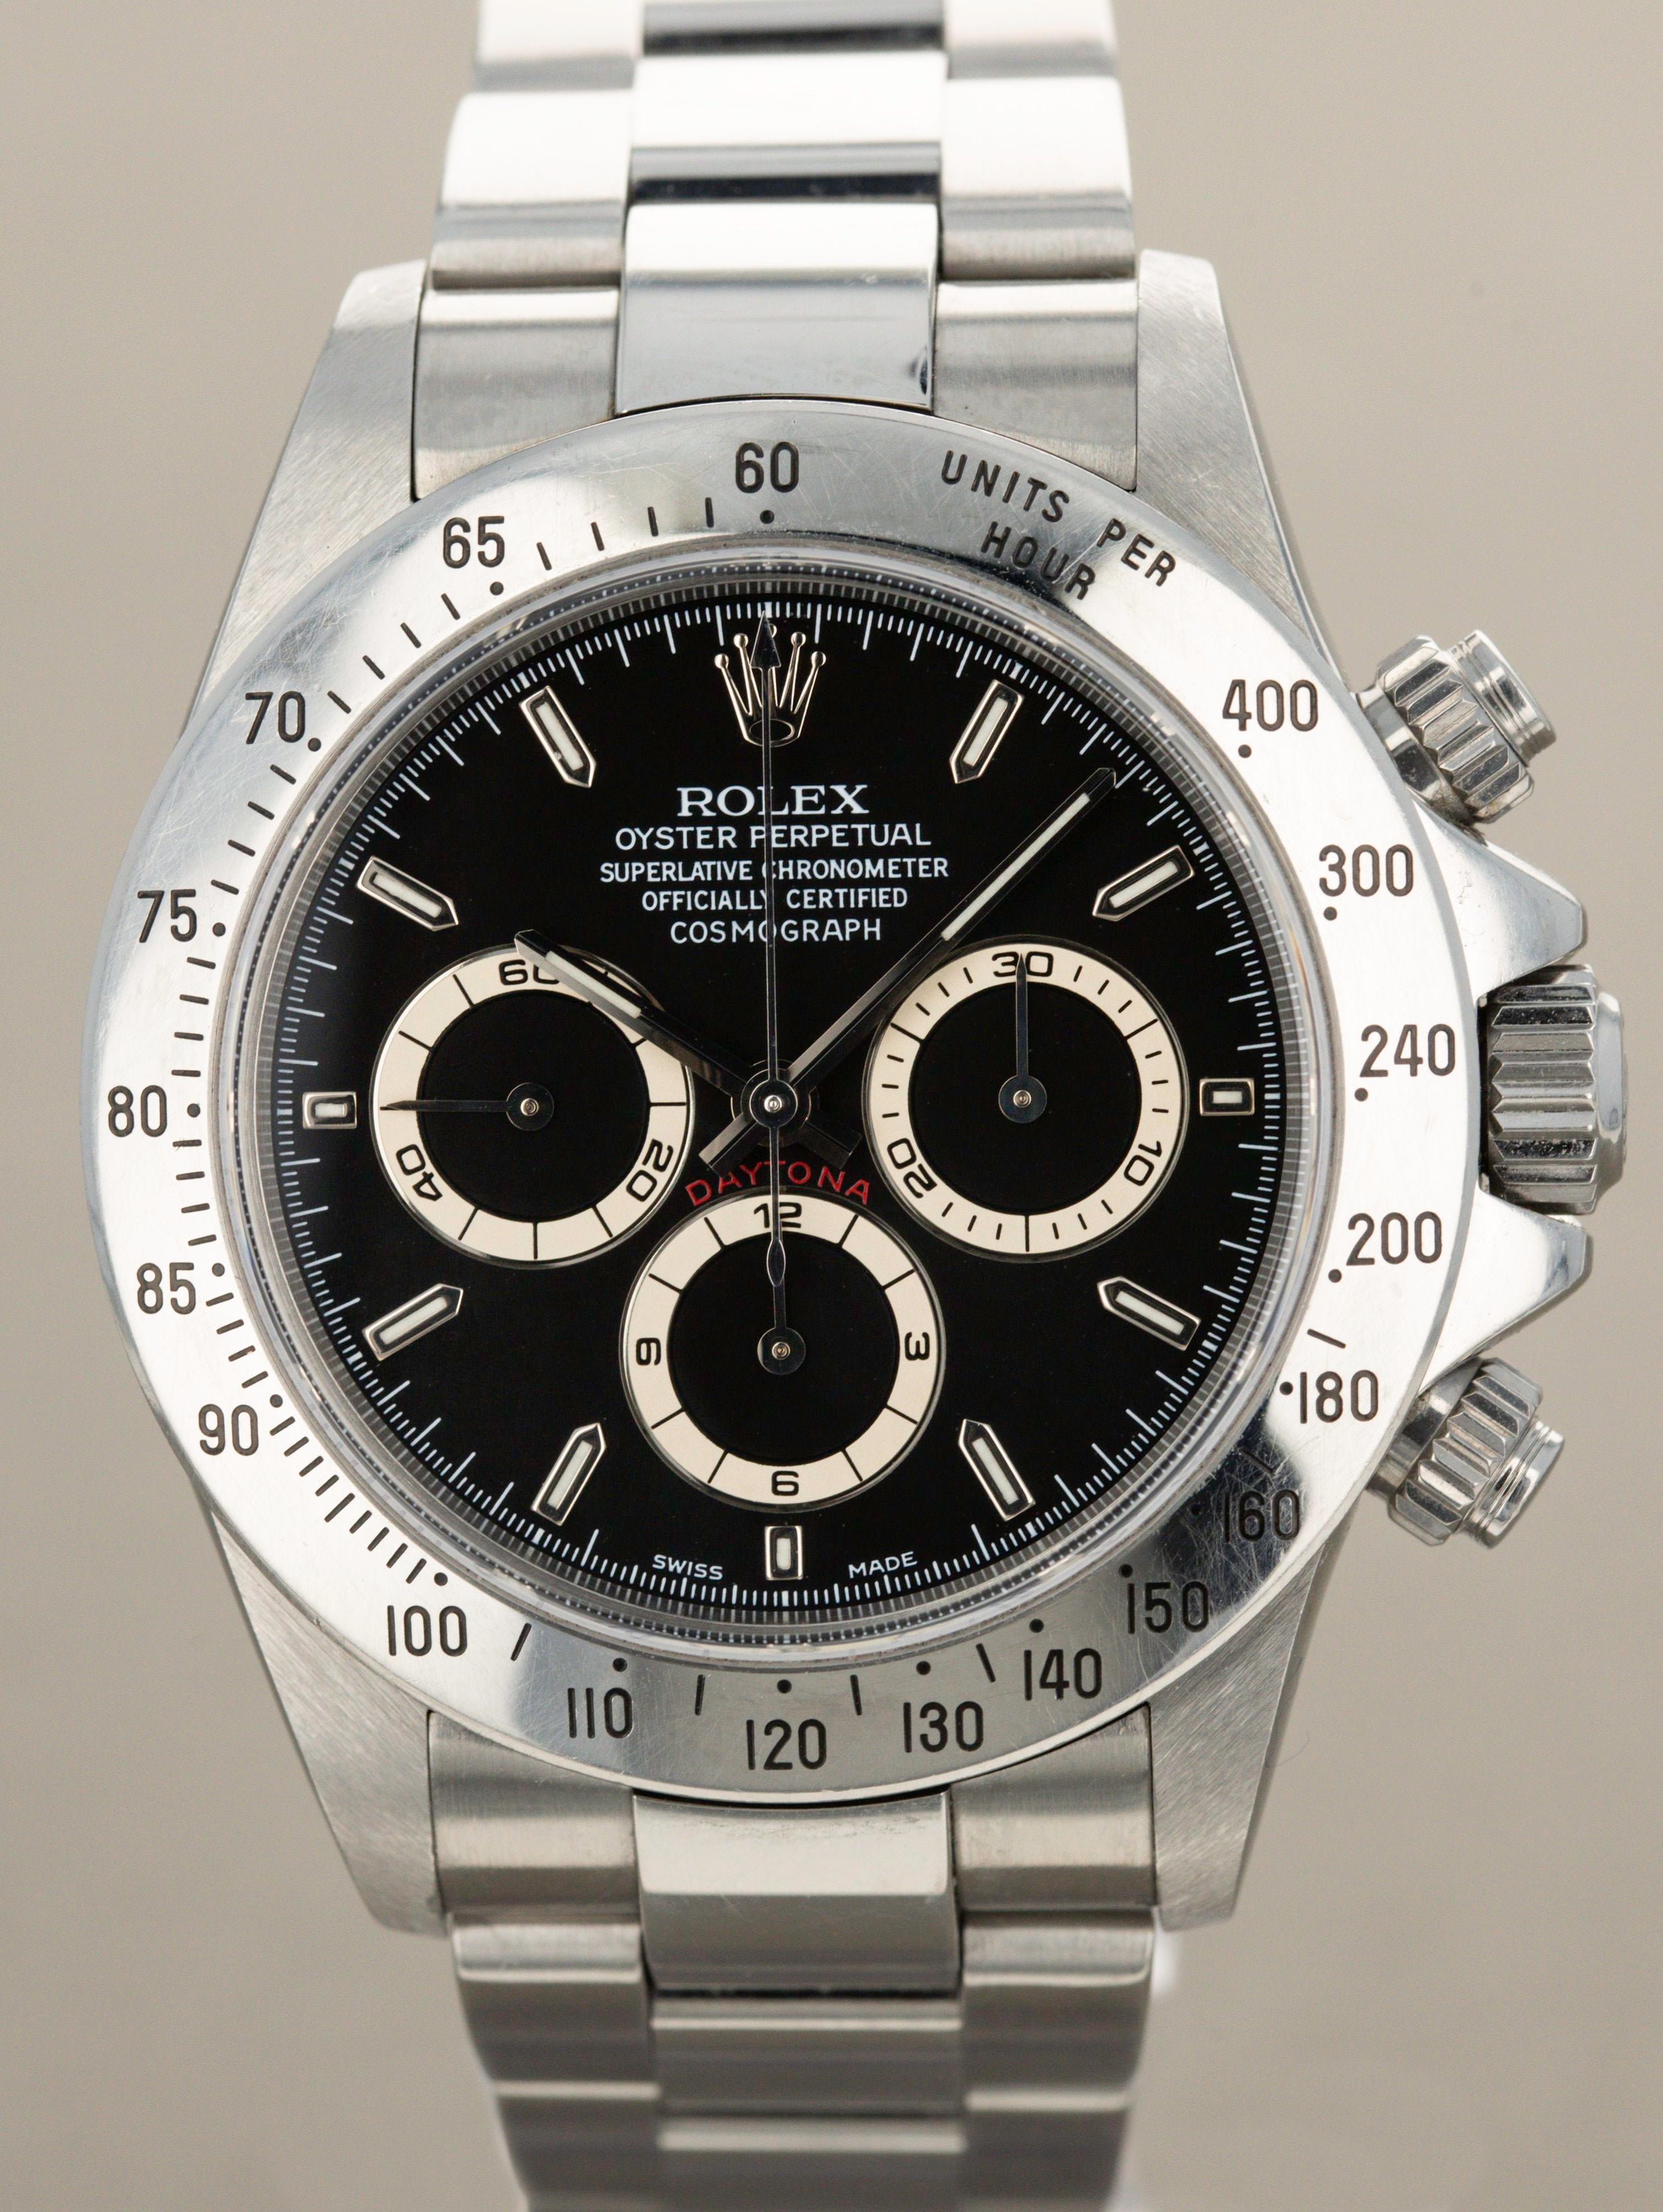 Rolex 'Zenith' Daytona Ref. 16520 - Mint Unpolished, with Boxes & Papers